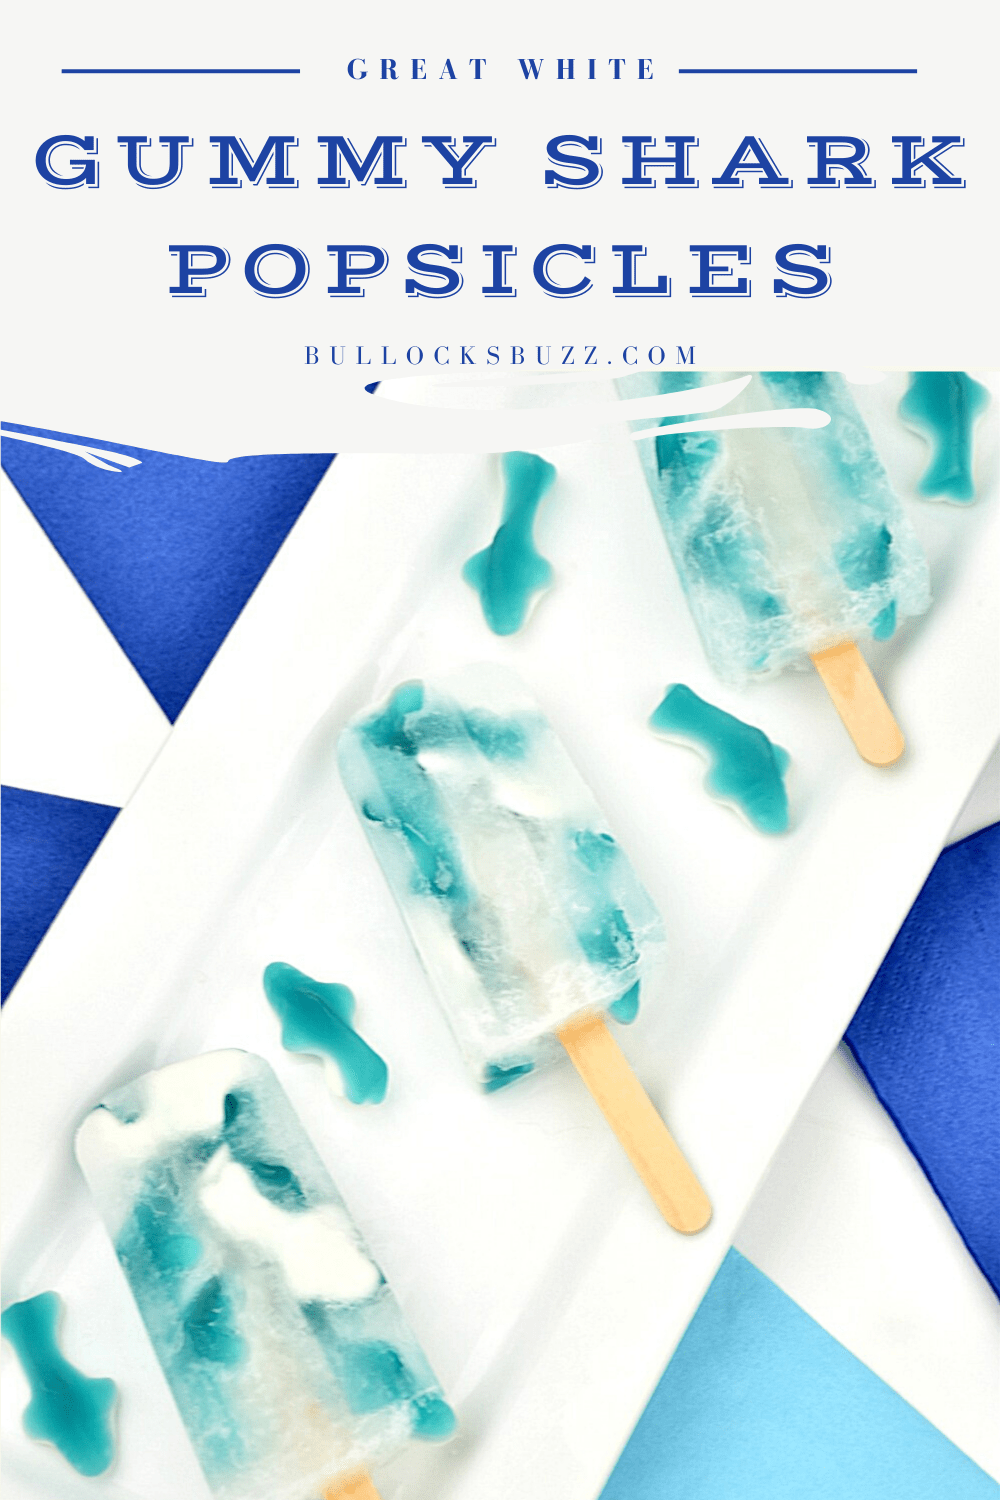 Fruit flavored gummy sharks are submerged in lemon-lime soda and frozen into delicious pops in this jawsome Great White Gummy Shark Popsicle recipe.